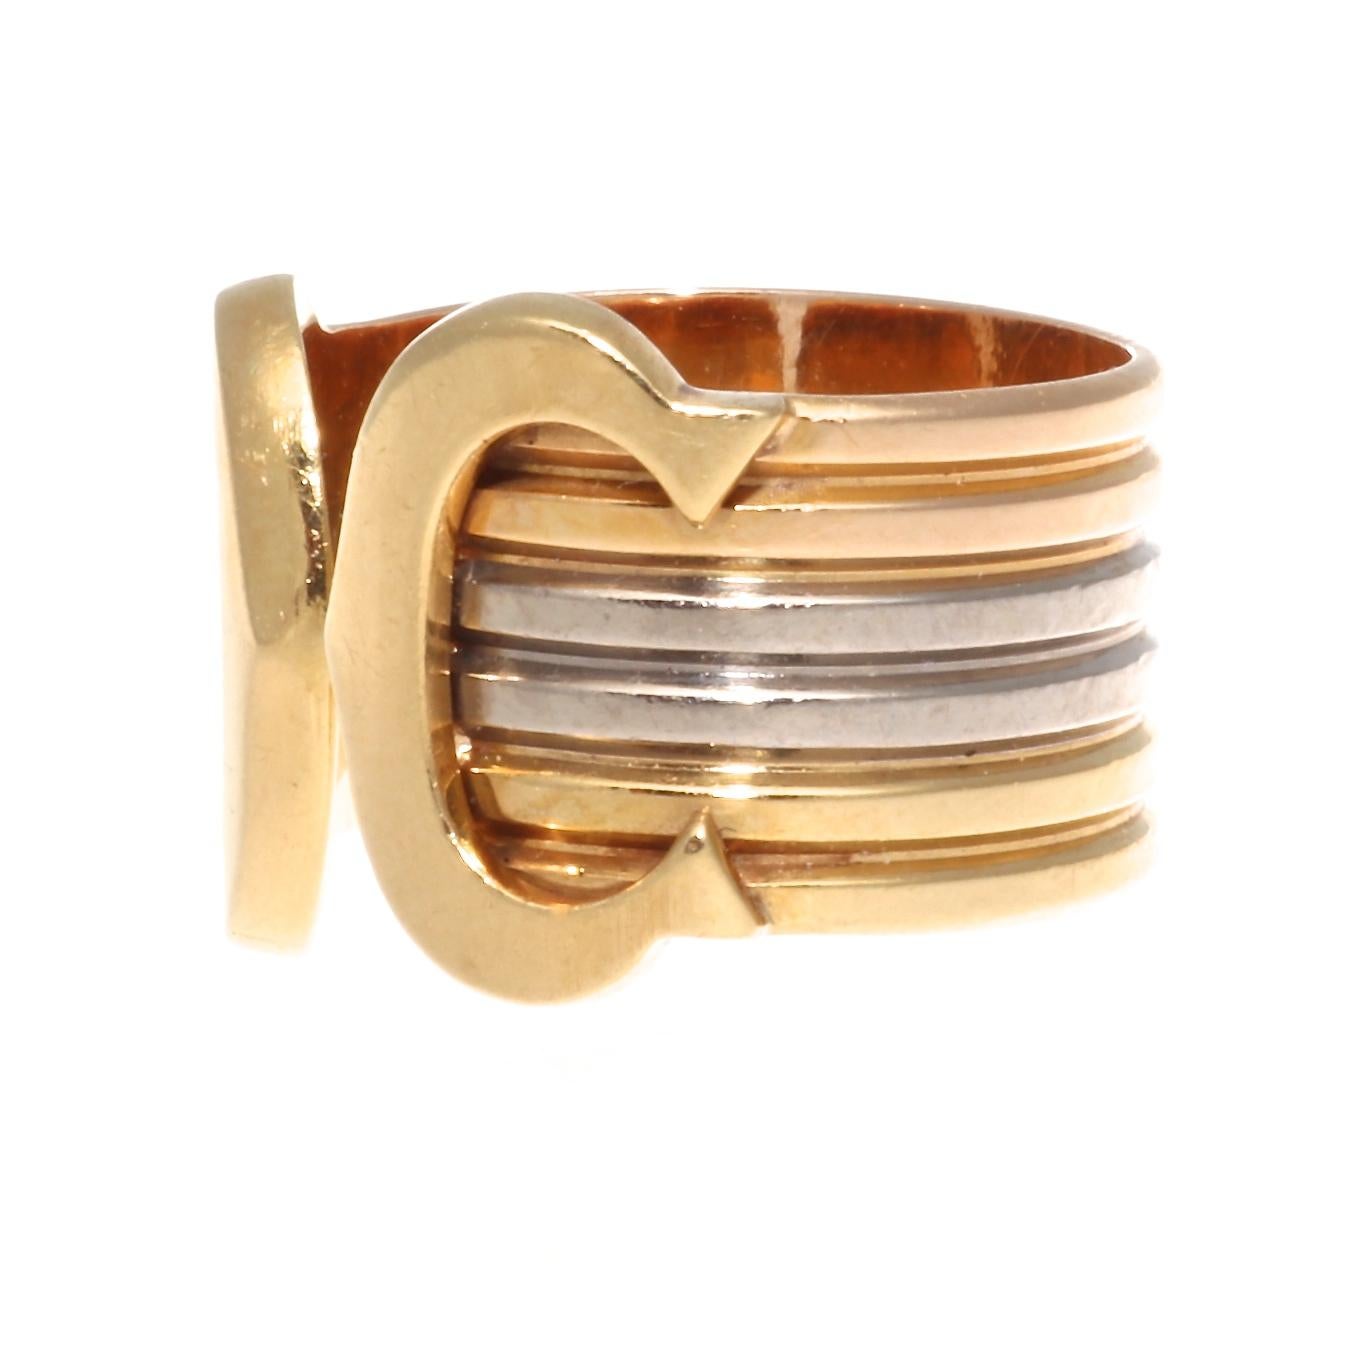 Cartier signature C ring is pure elegance. A discreet initial of unique purity. Featuring C's of yellow gold wrapped in a tricolor gold band. Signed Cartier, serial number. Ring size 49 or 4-3/4.